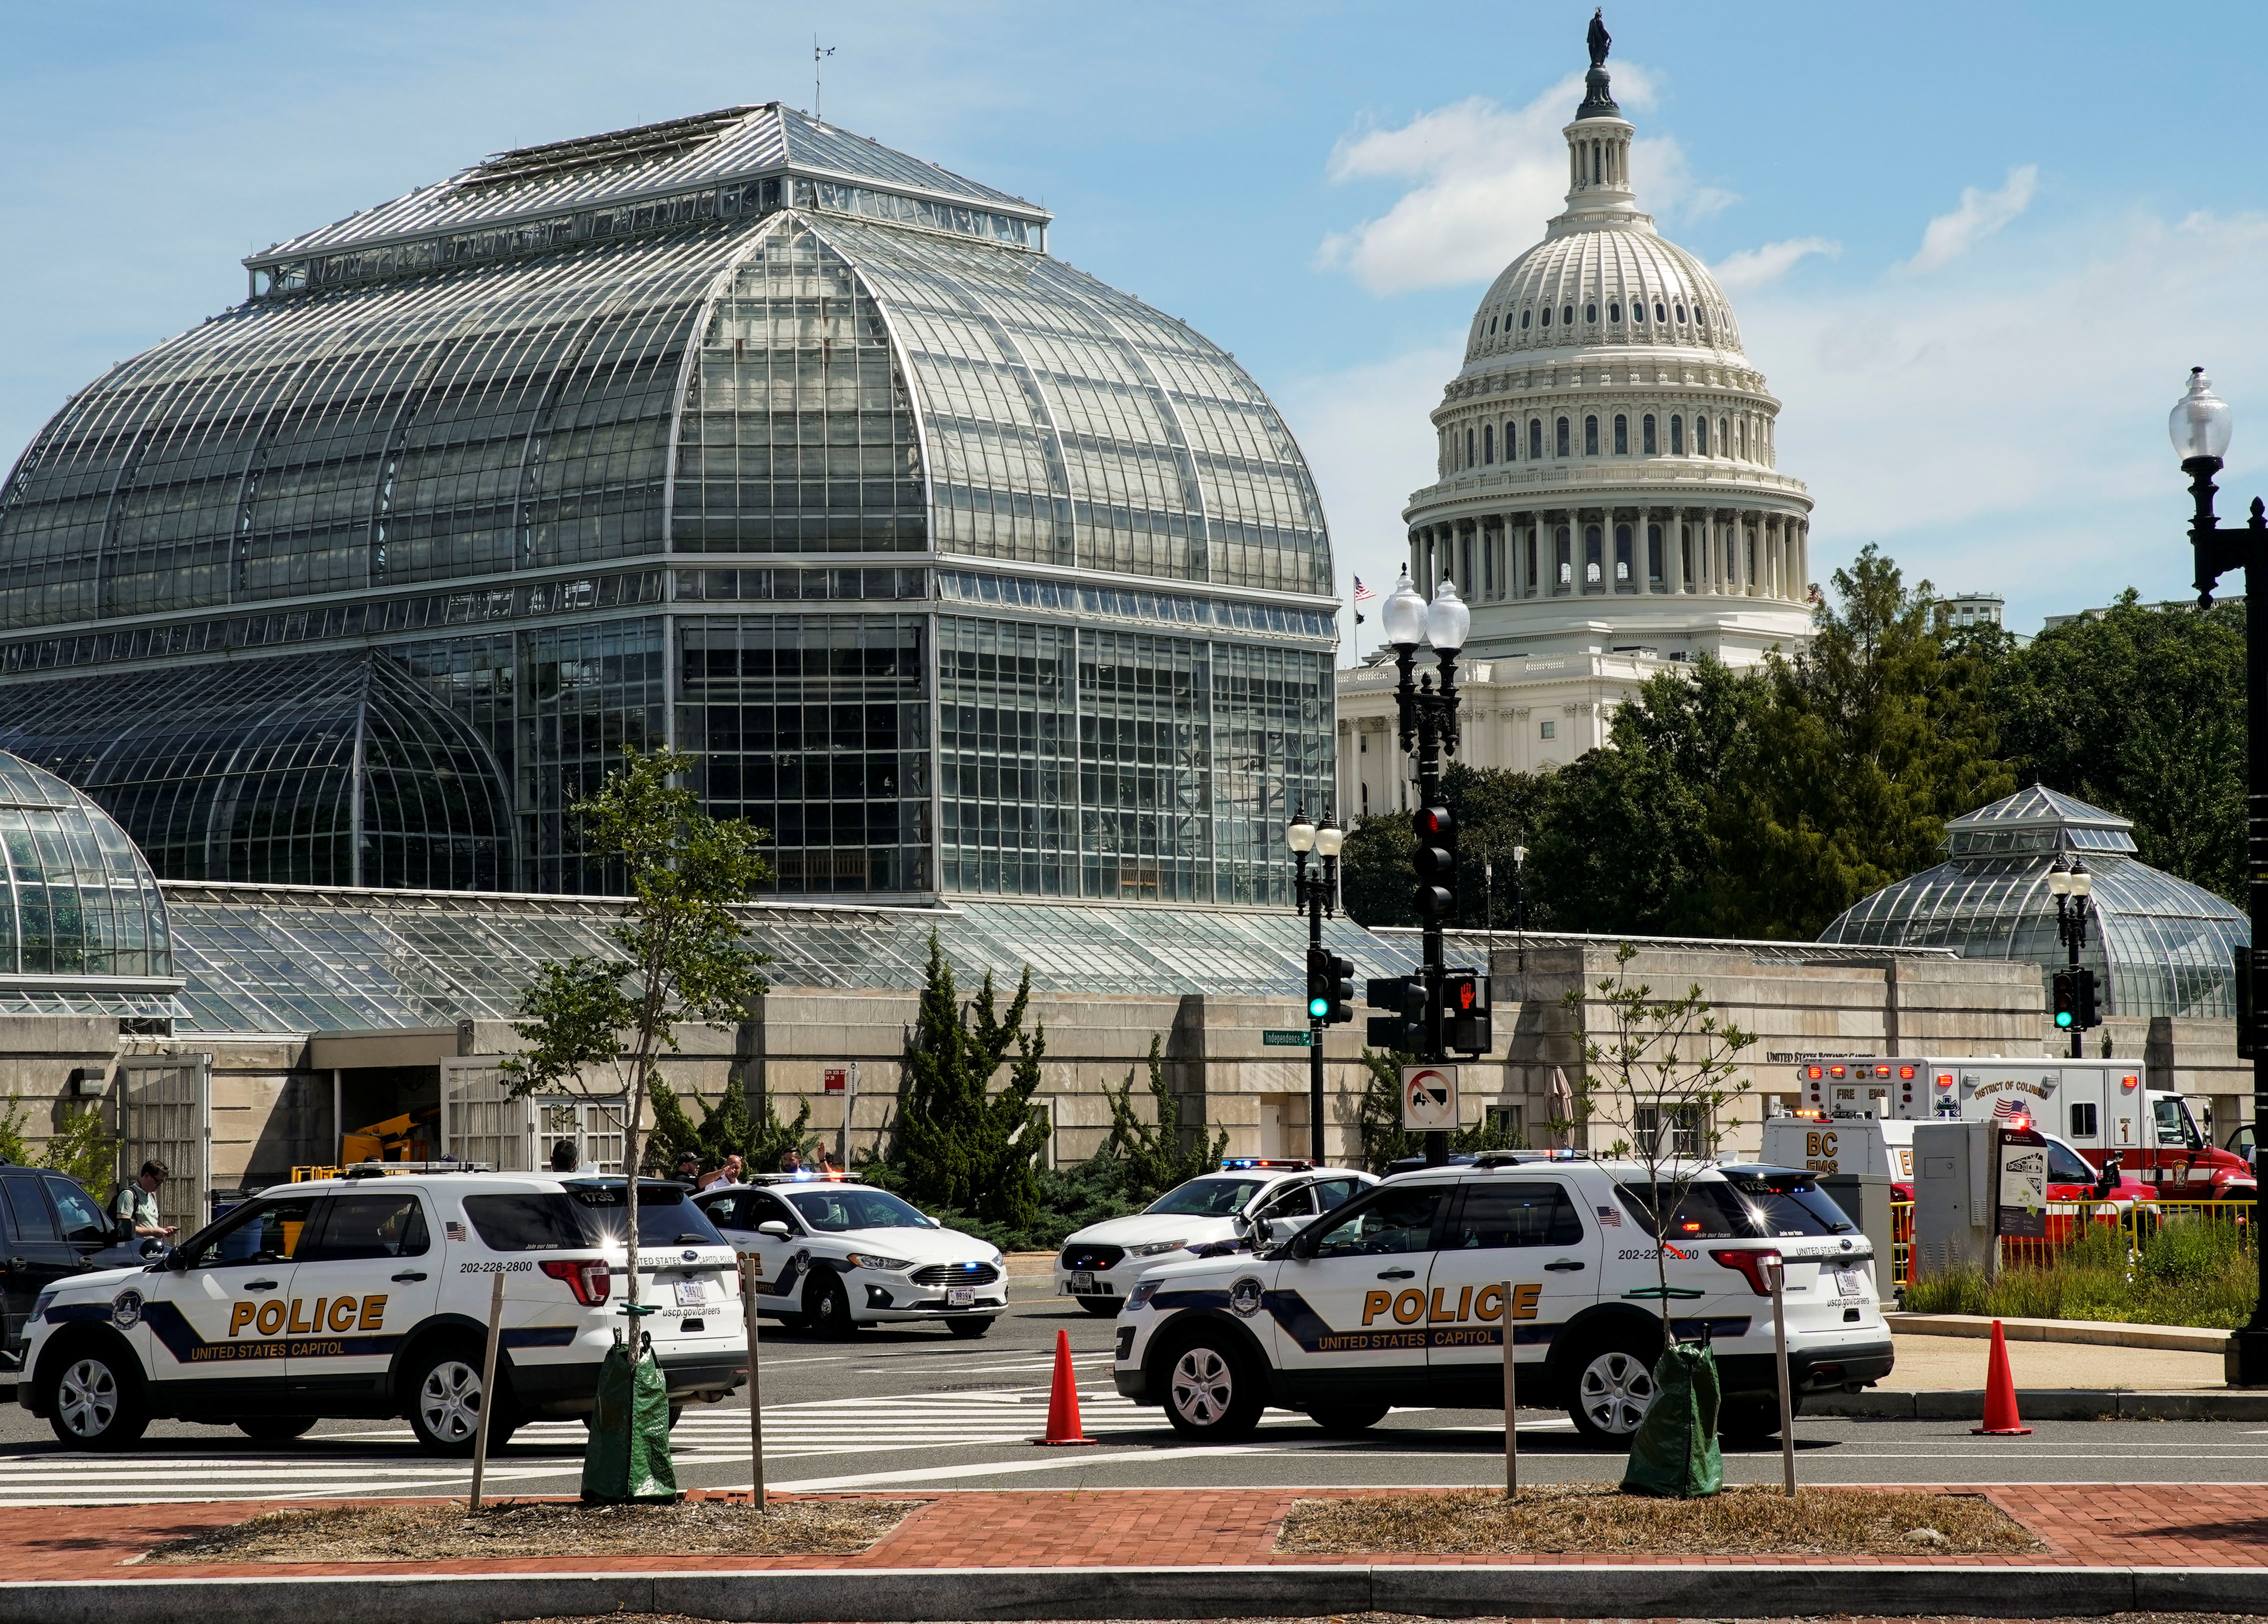 U.S. Capitol Police vehicles and other emergency vehicles respond as police investigated reports of a suspicious vehicle near the U.S. Capitol in Washington, U.S., August 19, 2021. REUTERS/Elizabeth Frantz